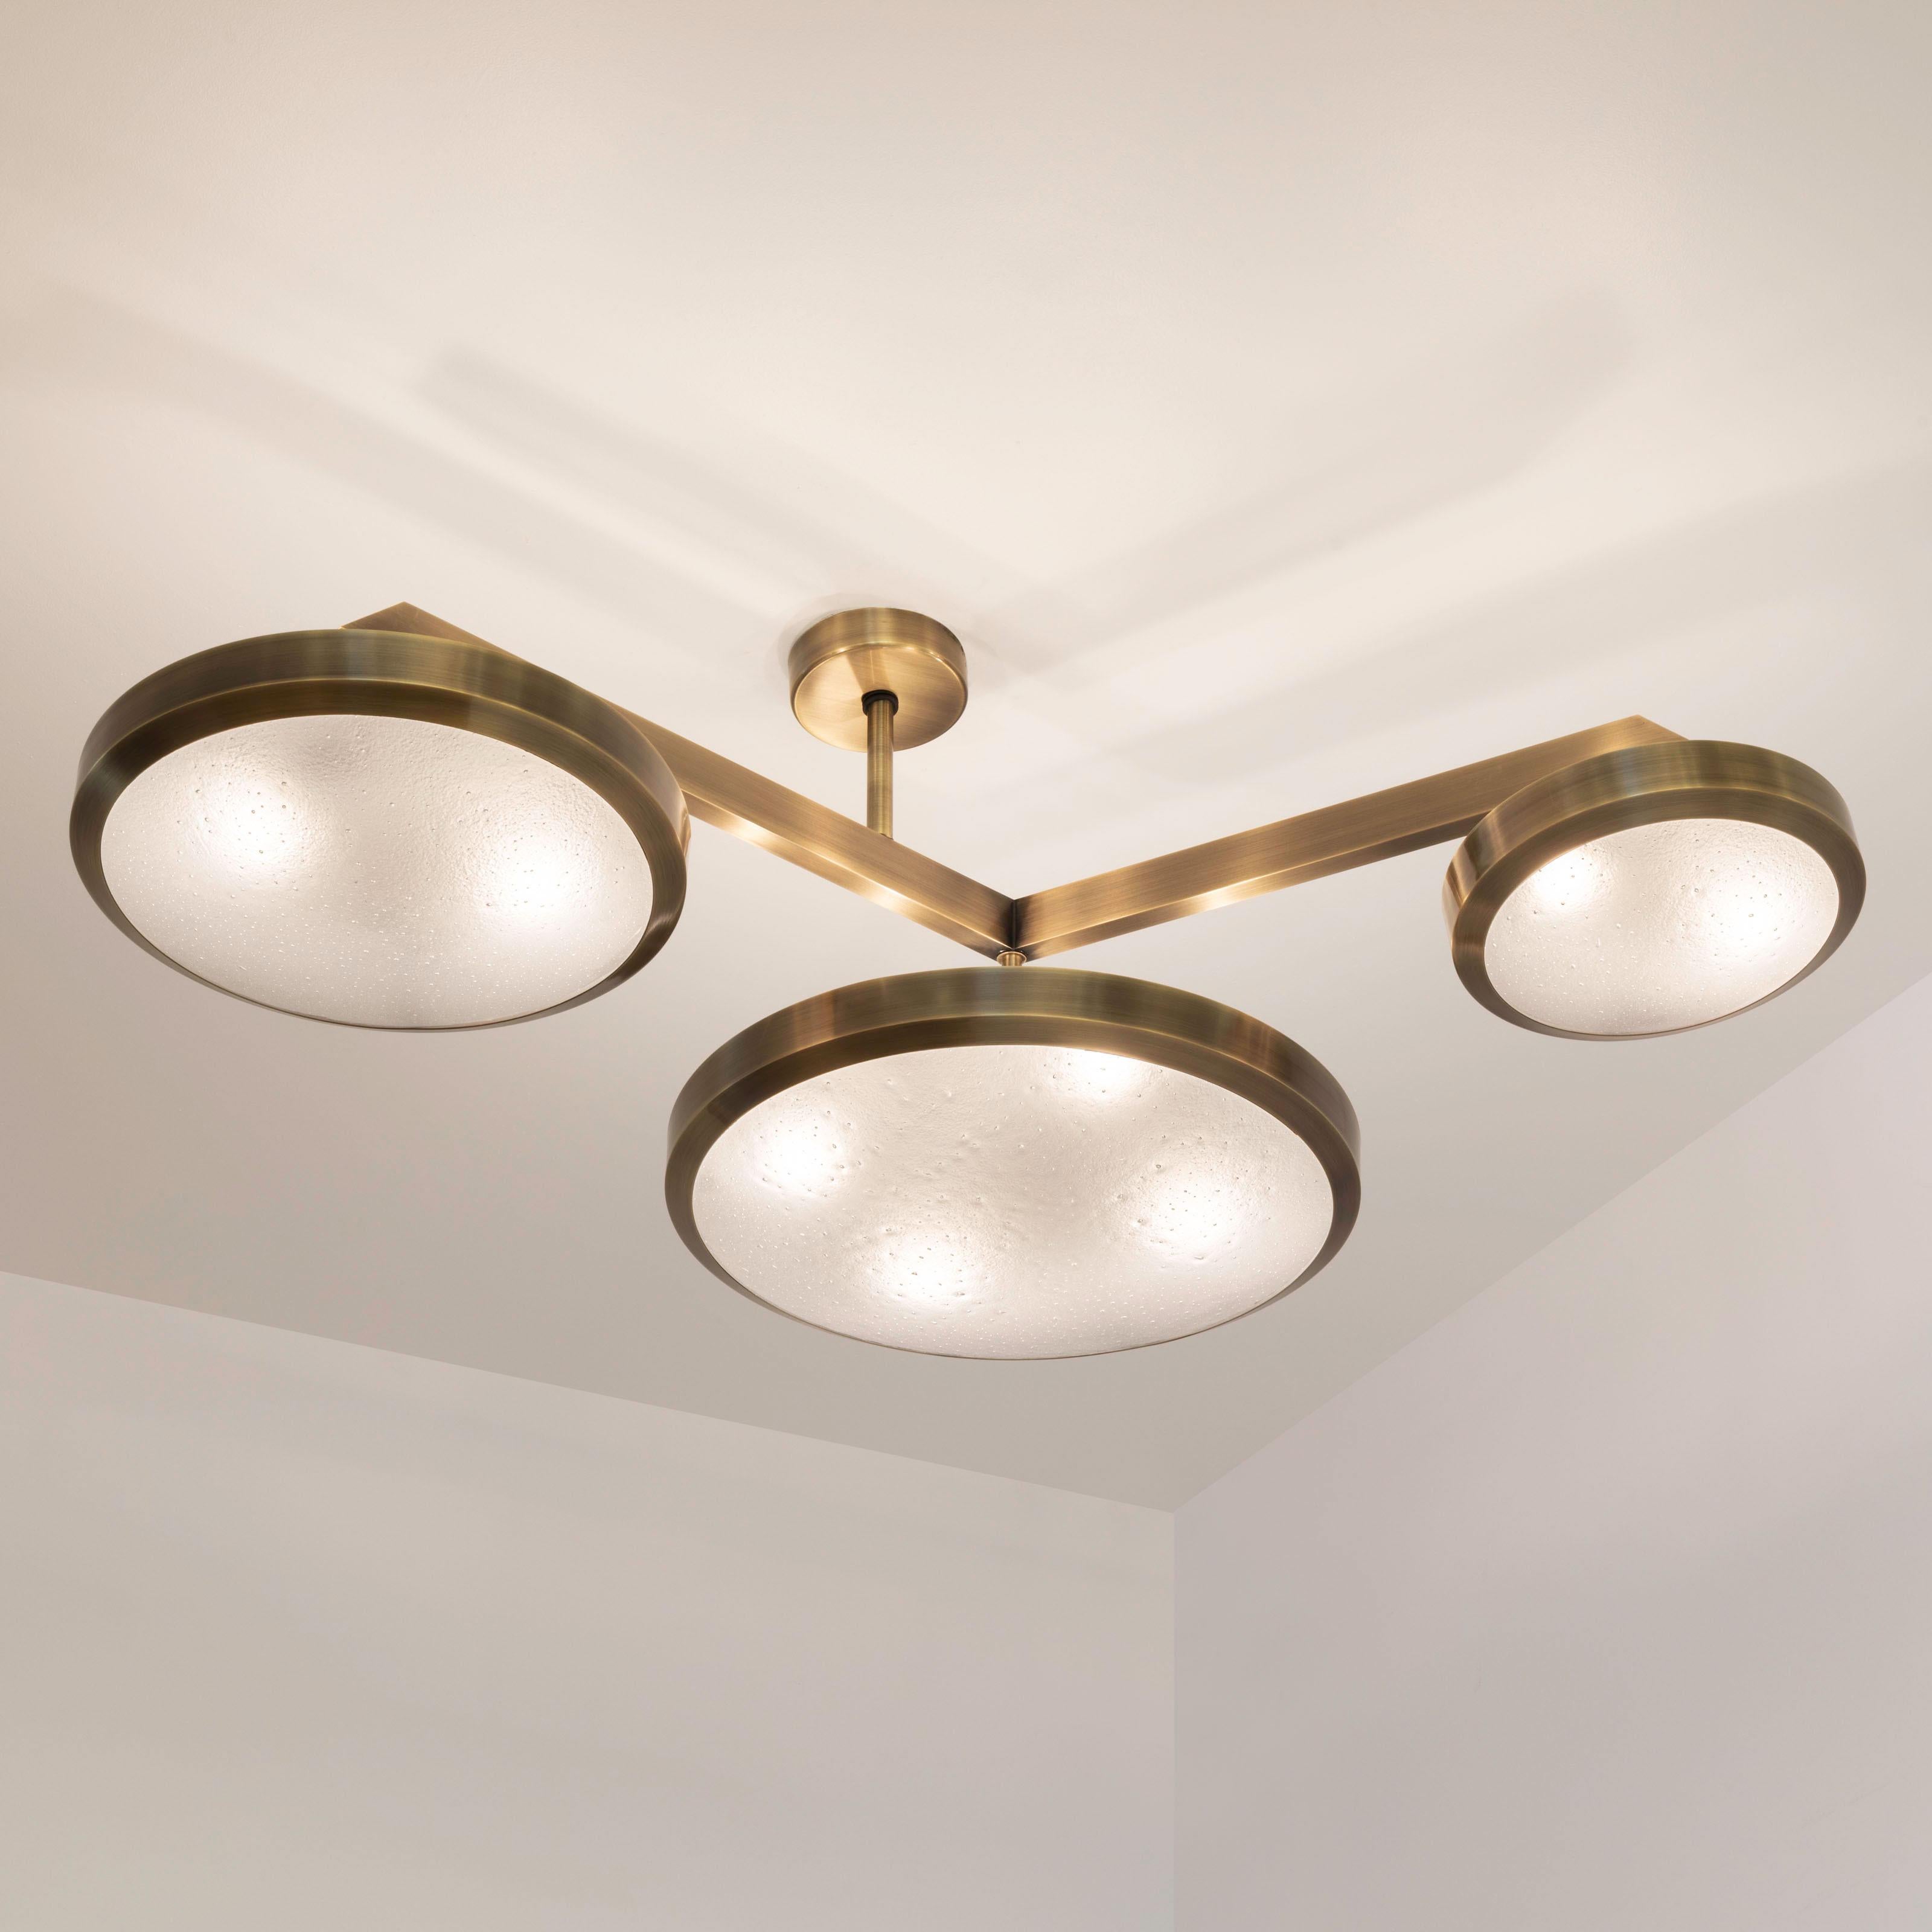 Contemporary Zeta Ceiling Light by Gaspare Asaro - Polished Brass Finish For Sale